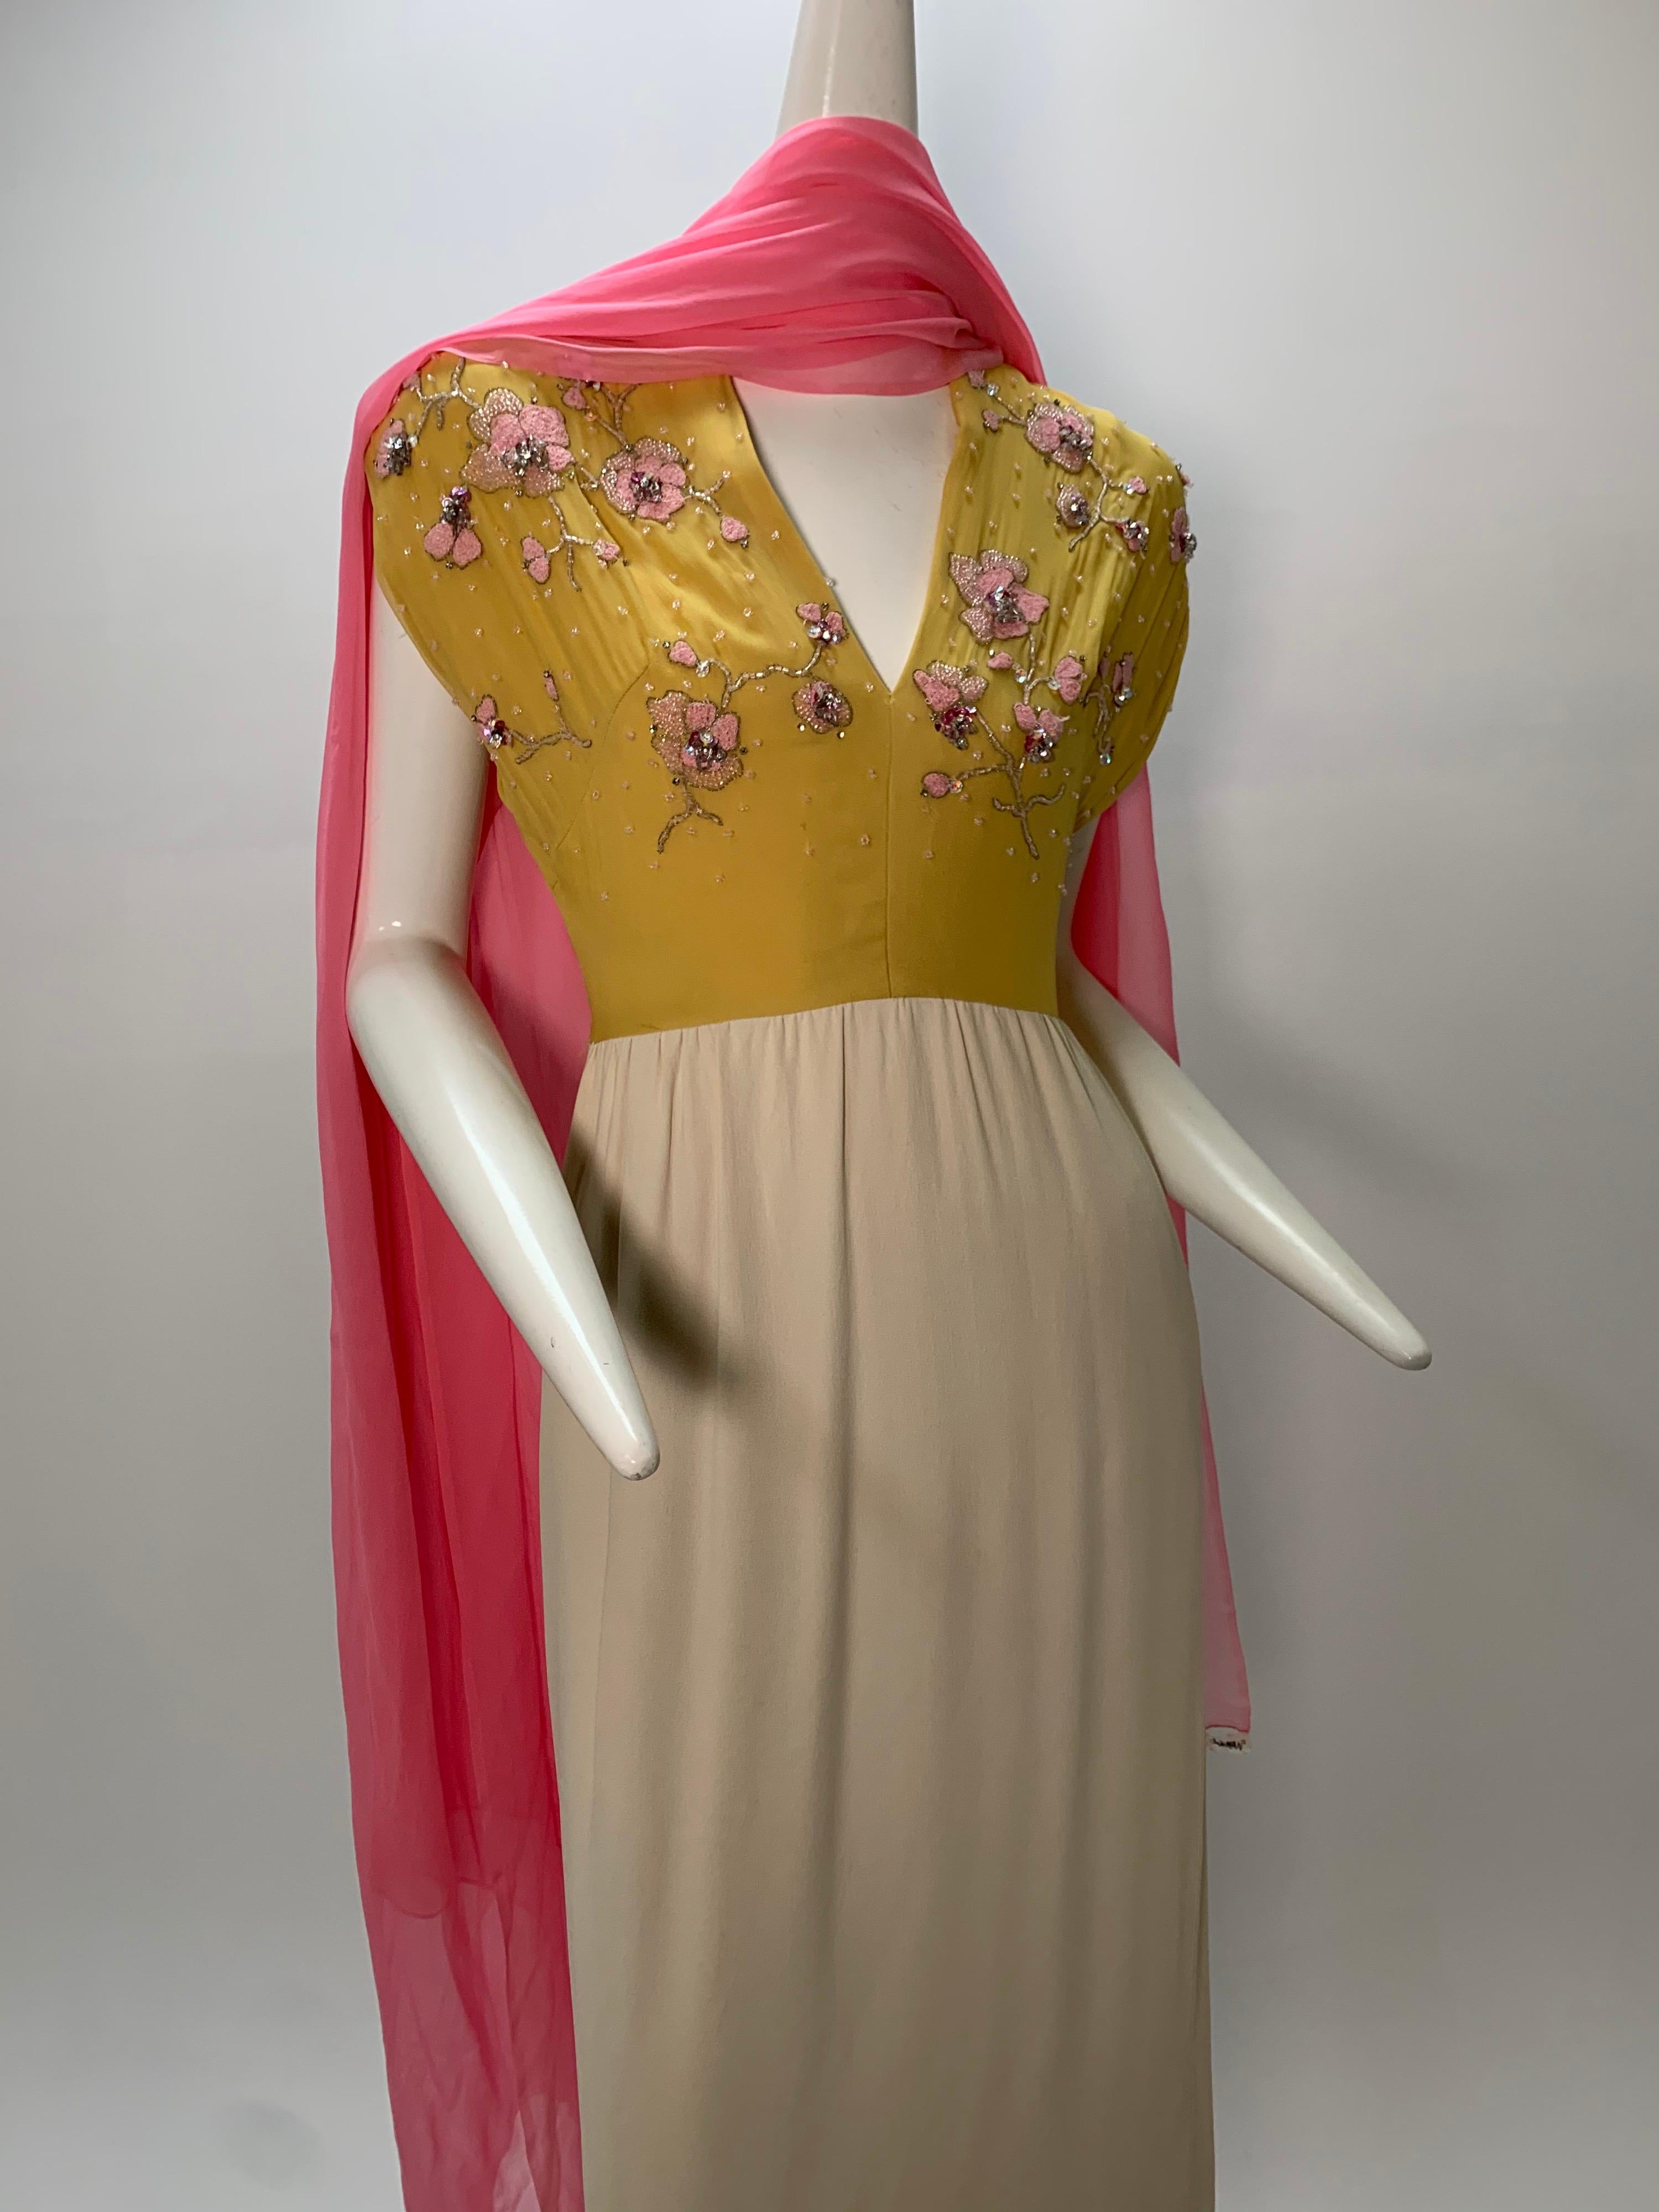 A 1960s John Hogan silk chiffon and crepe dress with drop-shoulder and a 1940s vibe: Silk chiffon mustard-color bodice embroidered in pink floral motif. Cream crepe skirt is cut long, at mid-calf. Pink chiffon accent scarf is included. 